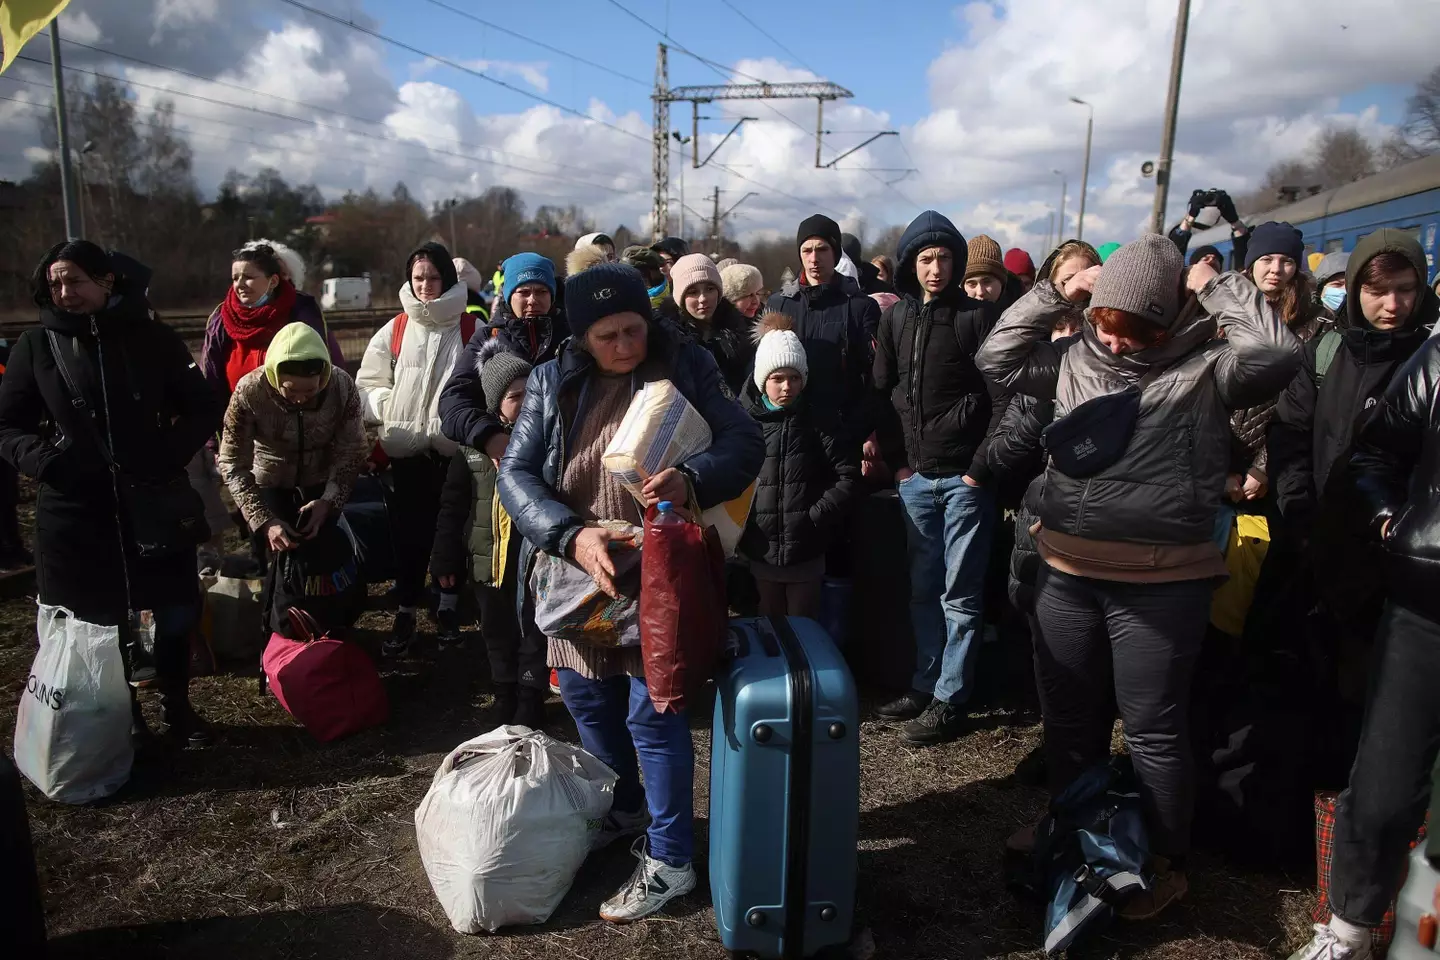 Russia accused of 'forcibly deporting' Ukrainians.